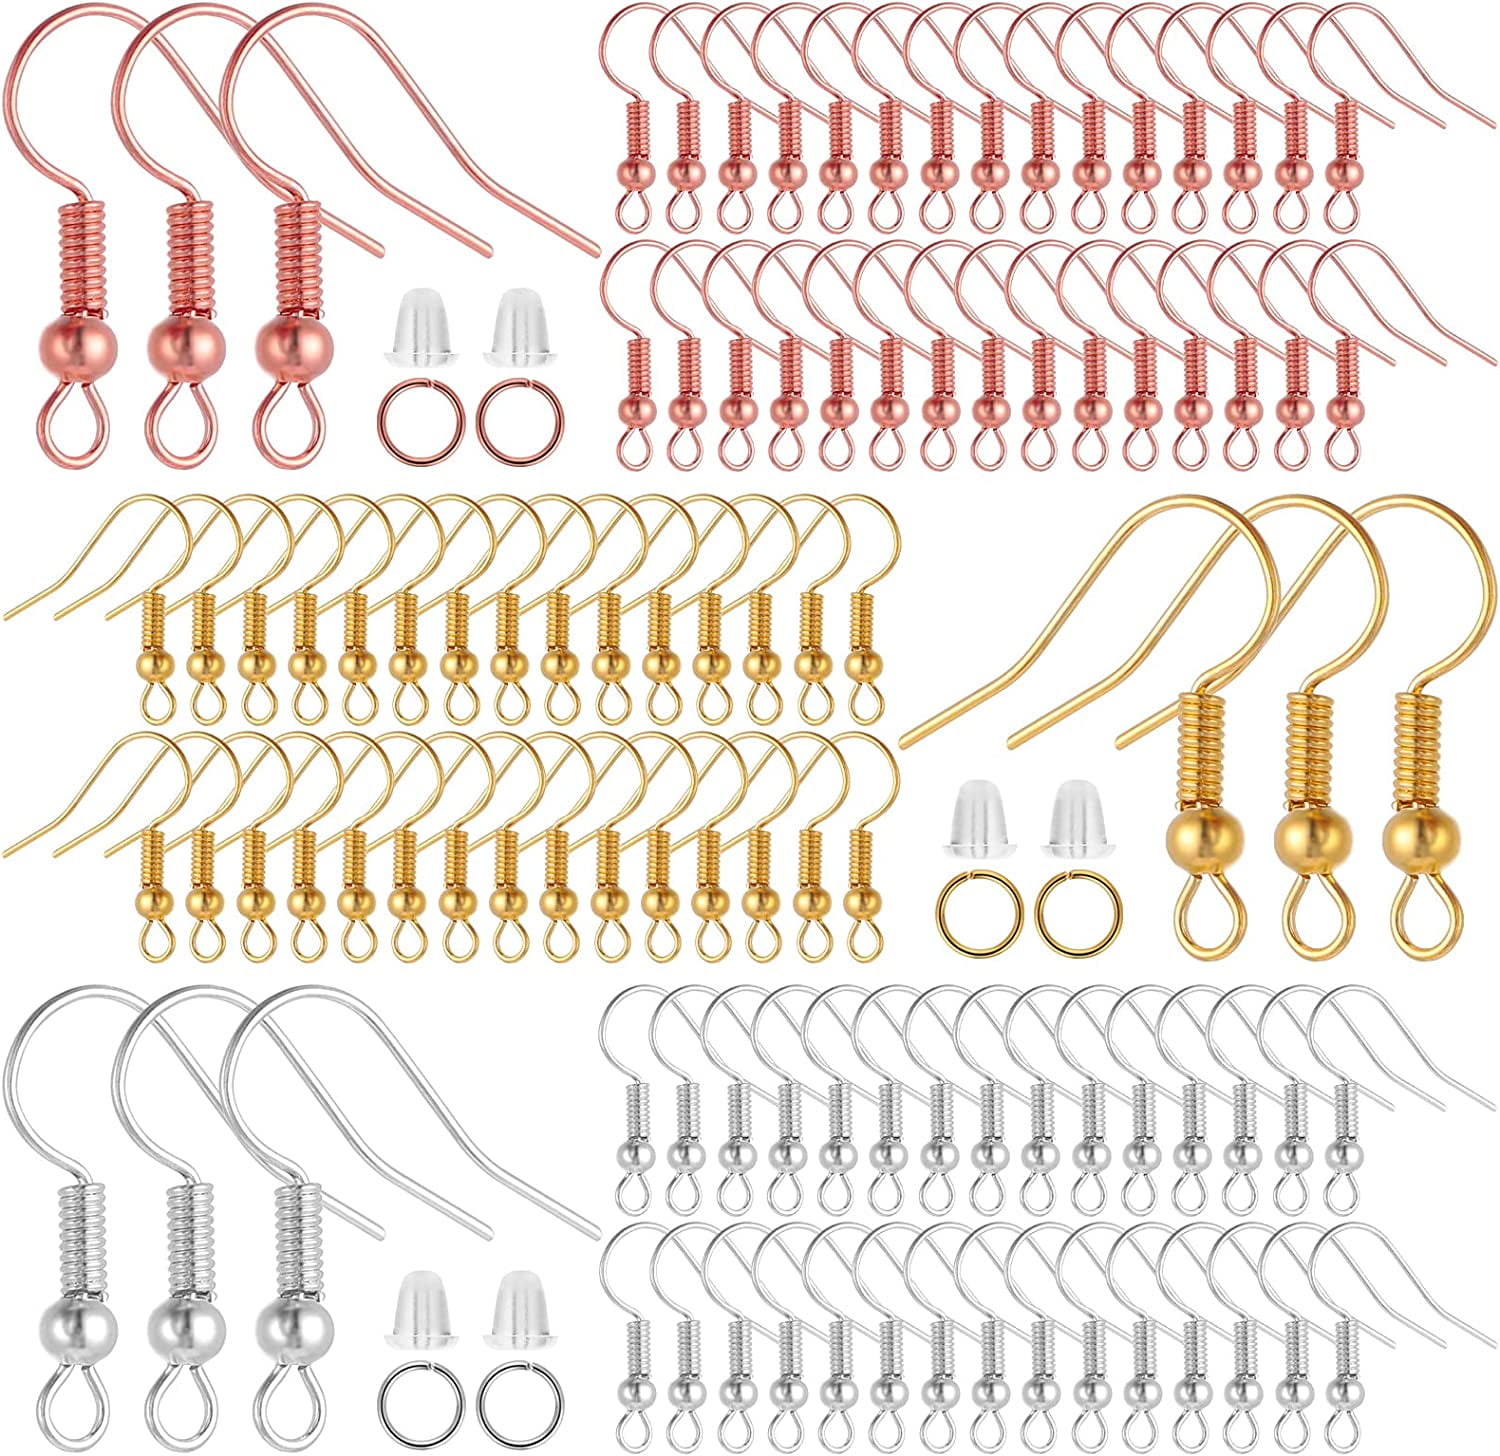 Hypoallergenic Goldhypoallergenic Silver Plated Earring Hooks 50pcs -  Jewelry Making Supplies